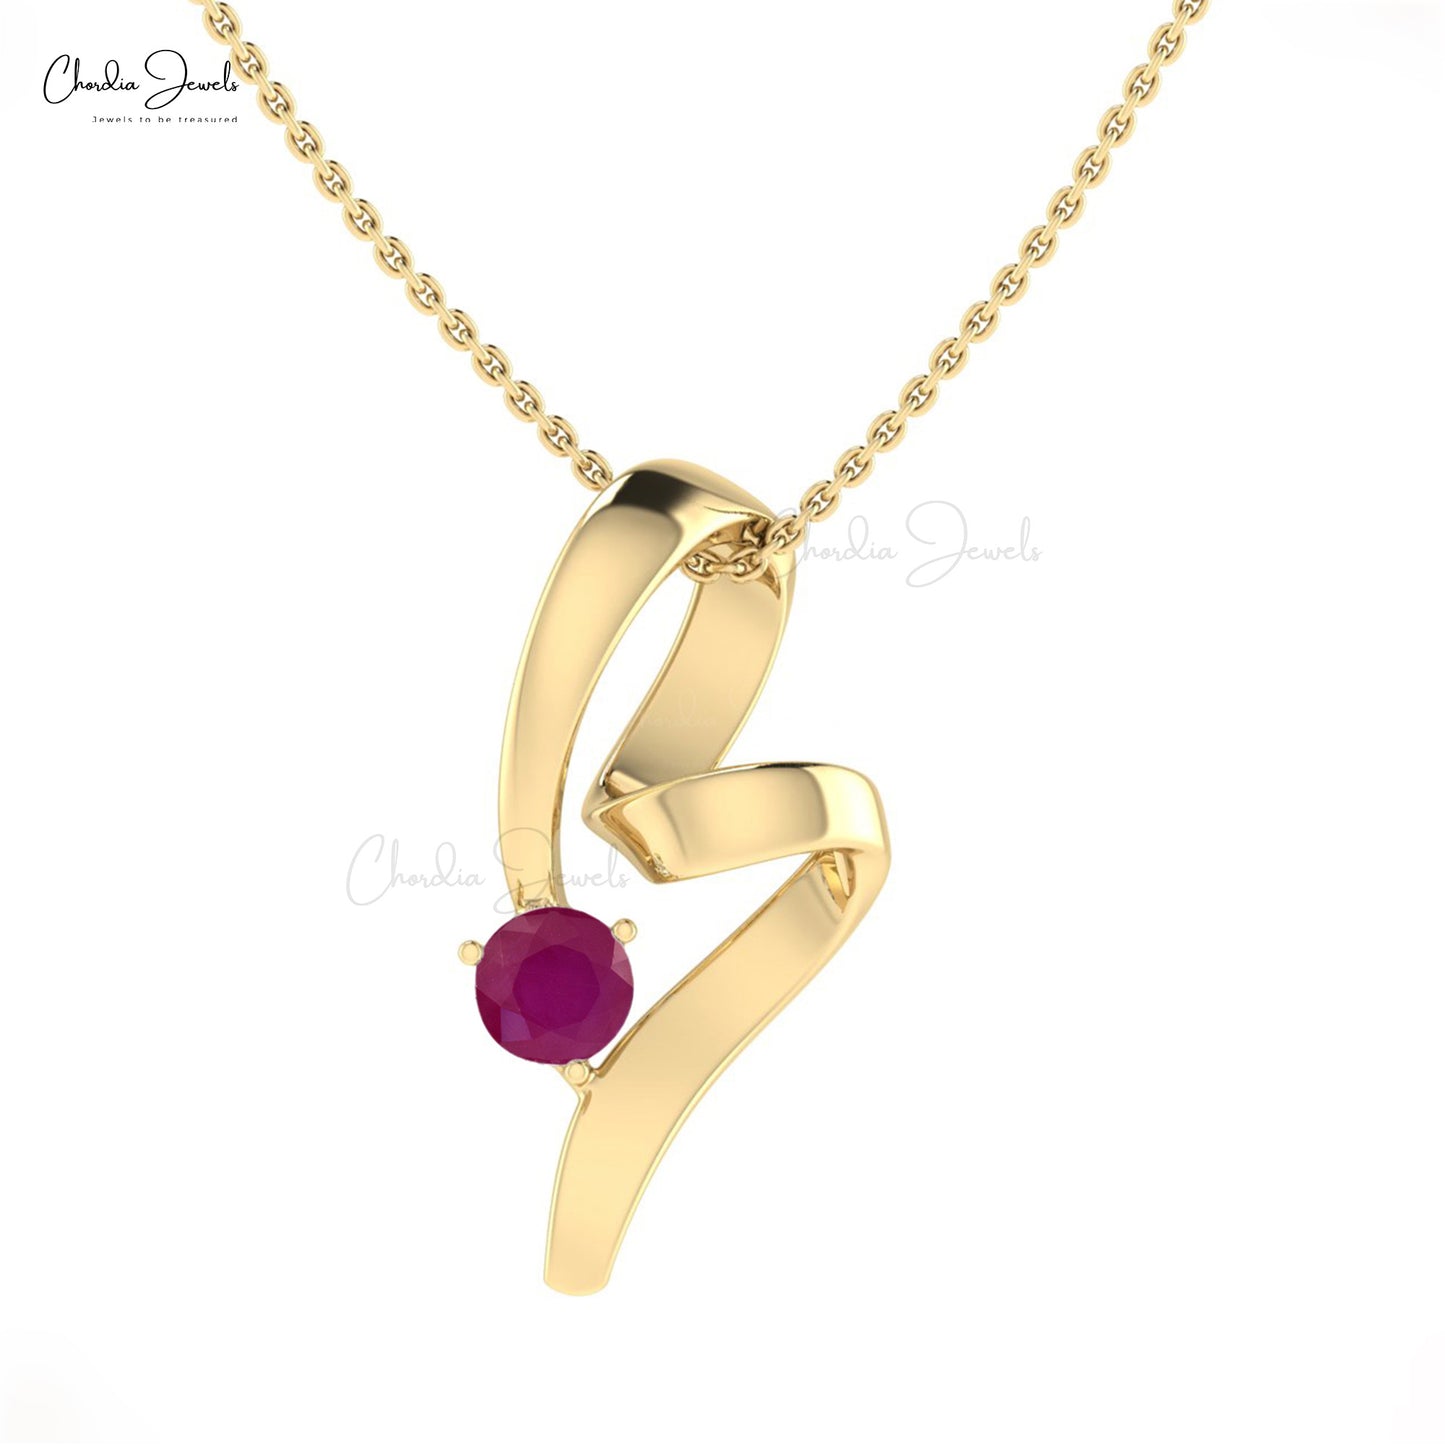 Genuine Ruby Round Cut Solitaire Twisted Pendant